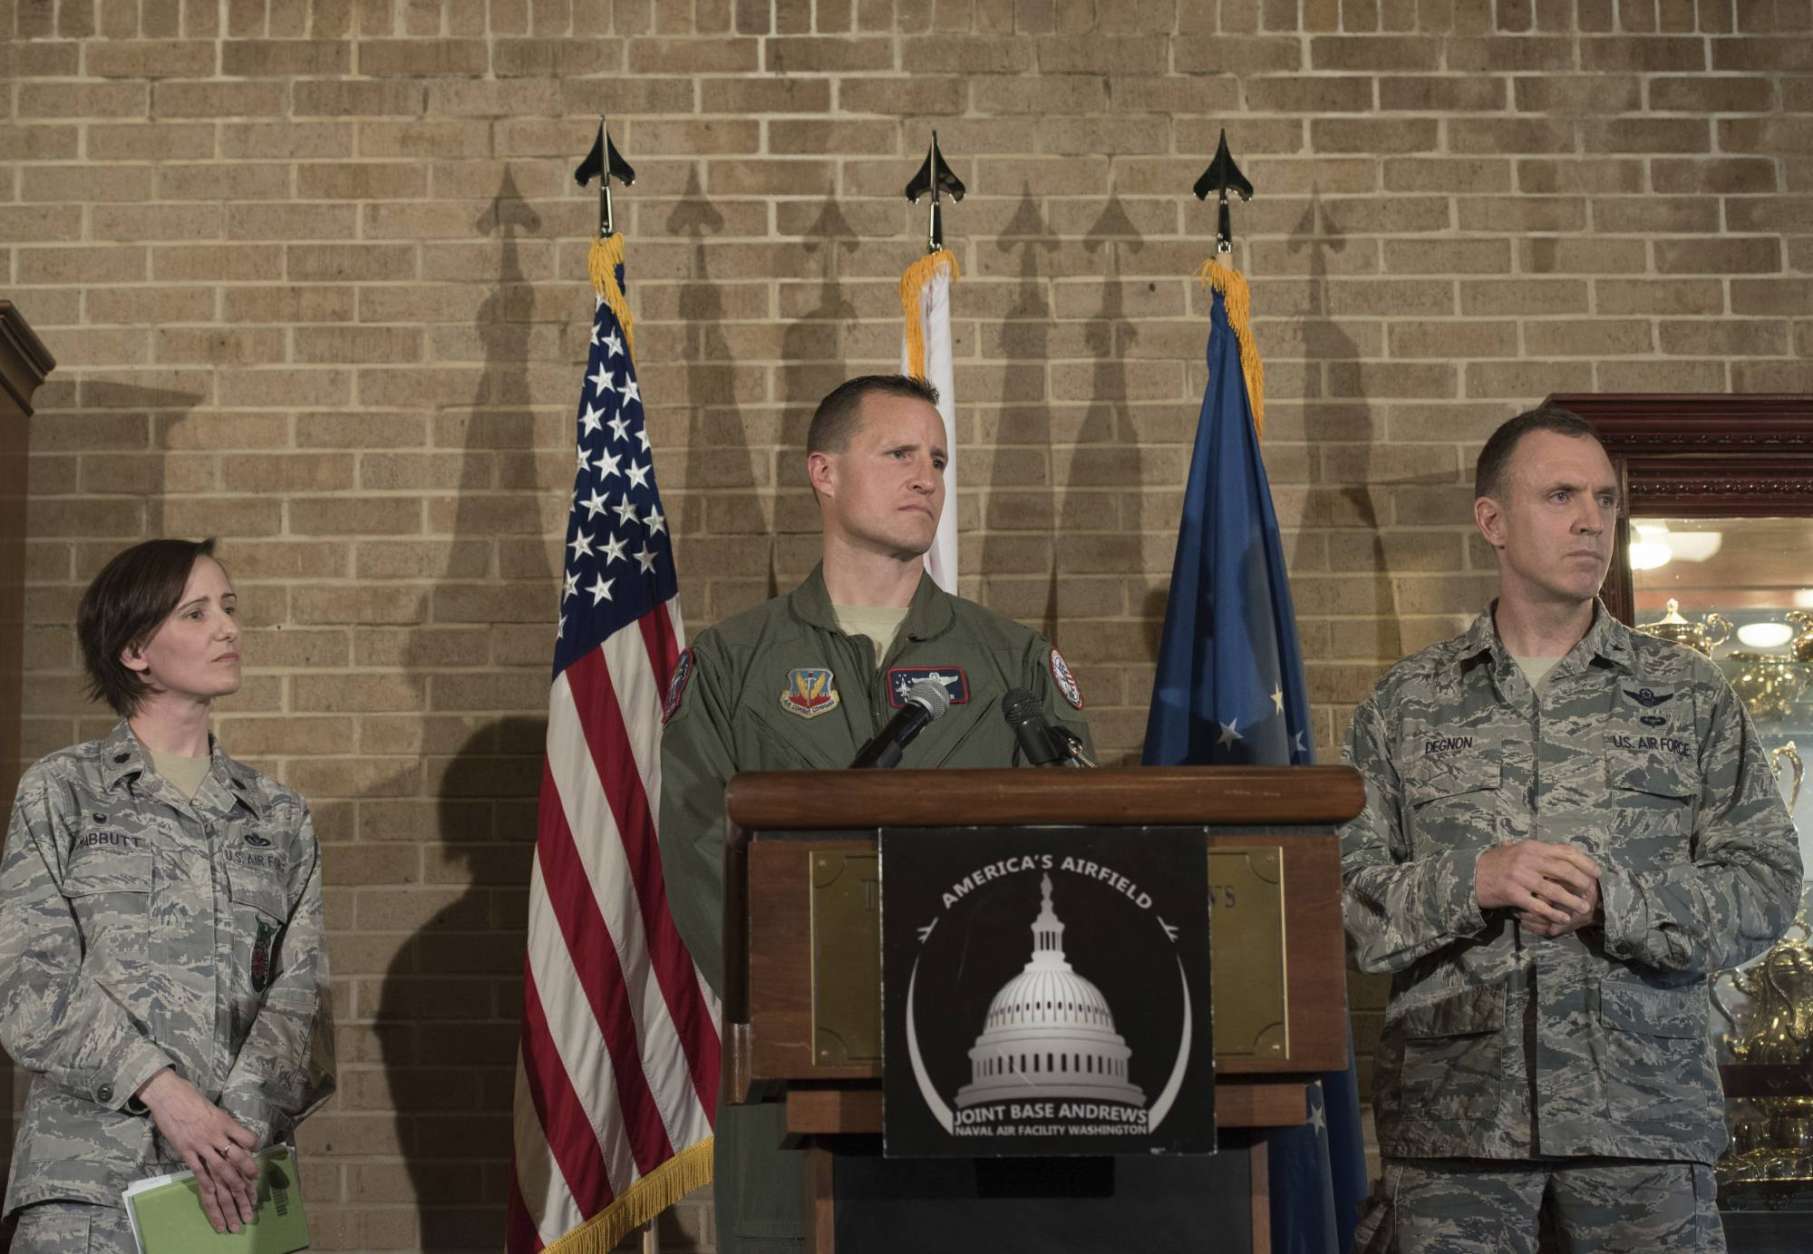 From left, Lt. Col. Lisa Mabbutt, Lt. Colonel Michael Croker and Brigadier General George Degnon of the D.C. Air National Guard, participate in a news conference at Andrews Air Force Base, Md., Wednesday, April 5, 2017, about the military aircraft crash in Clinton, Md.  A fighter pilot on a training mission ejected safely before the jet crashed in a wooded area in a Washington suburb. Witnesses reported the sound of live ammunition. (AP Photo/Sait Serkan Gurbuz)